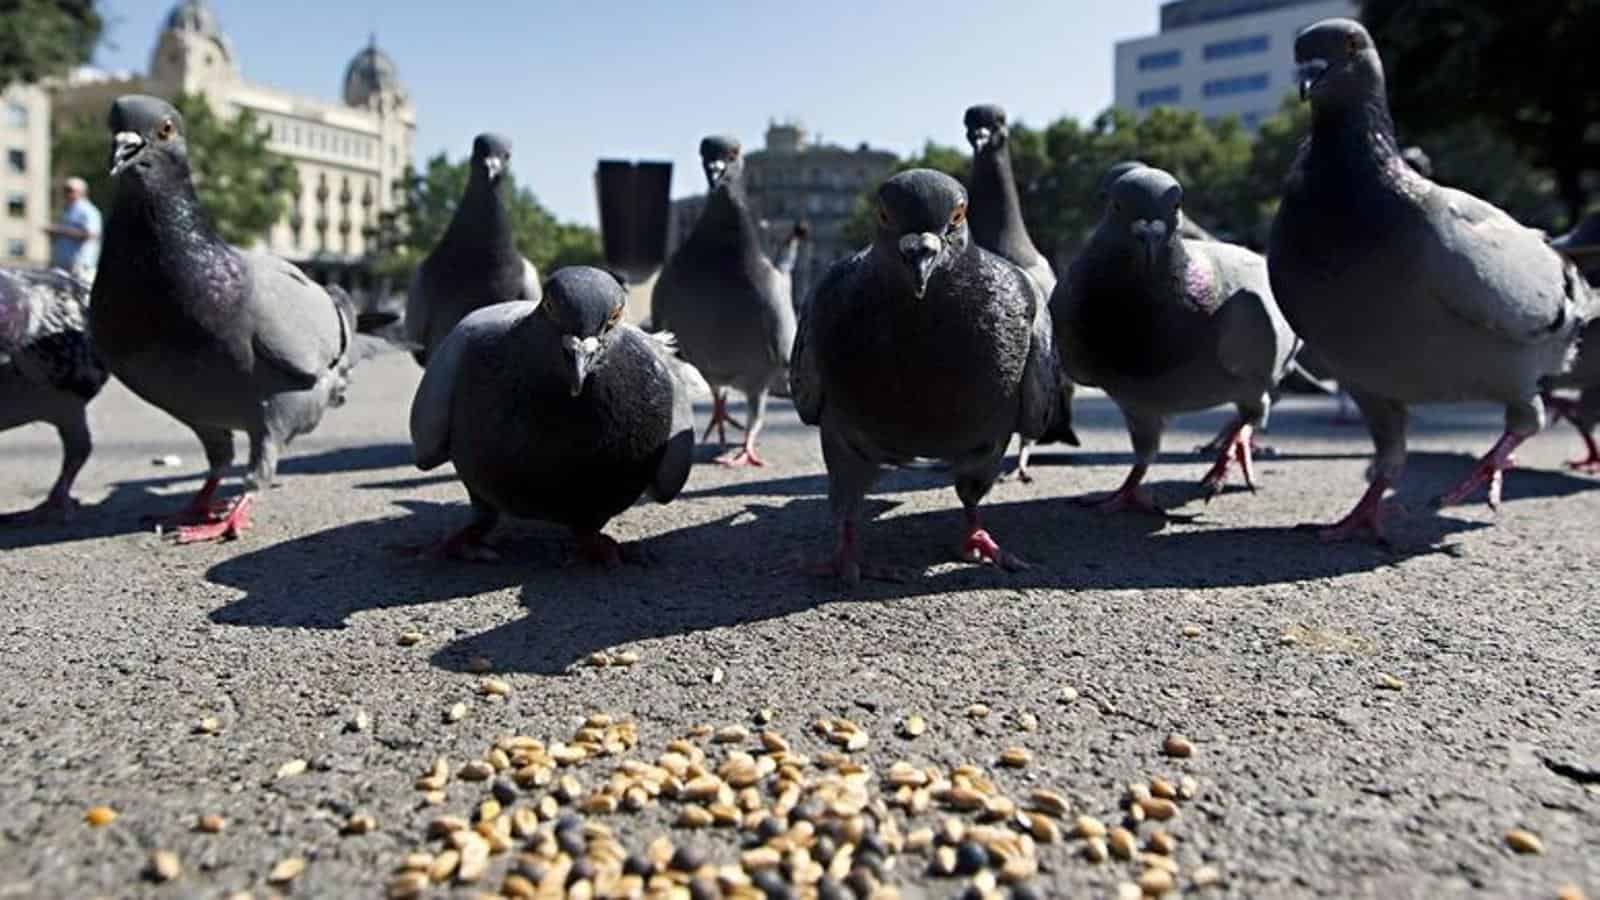 Barcelona seeks to reduce pigeon population and asks not to feed them